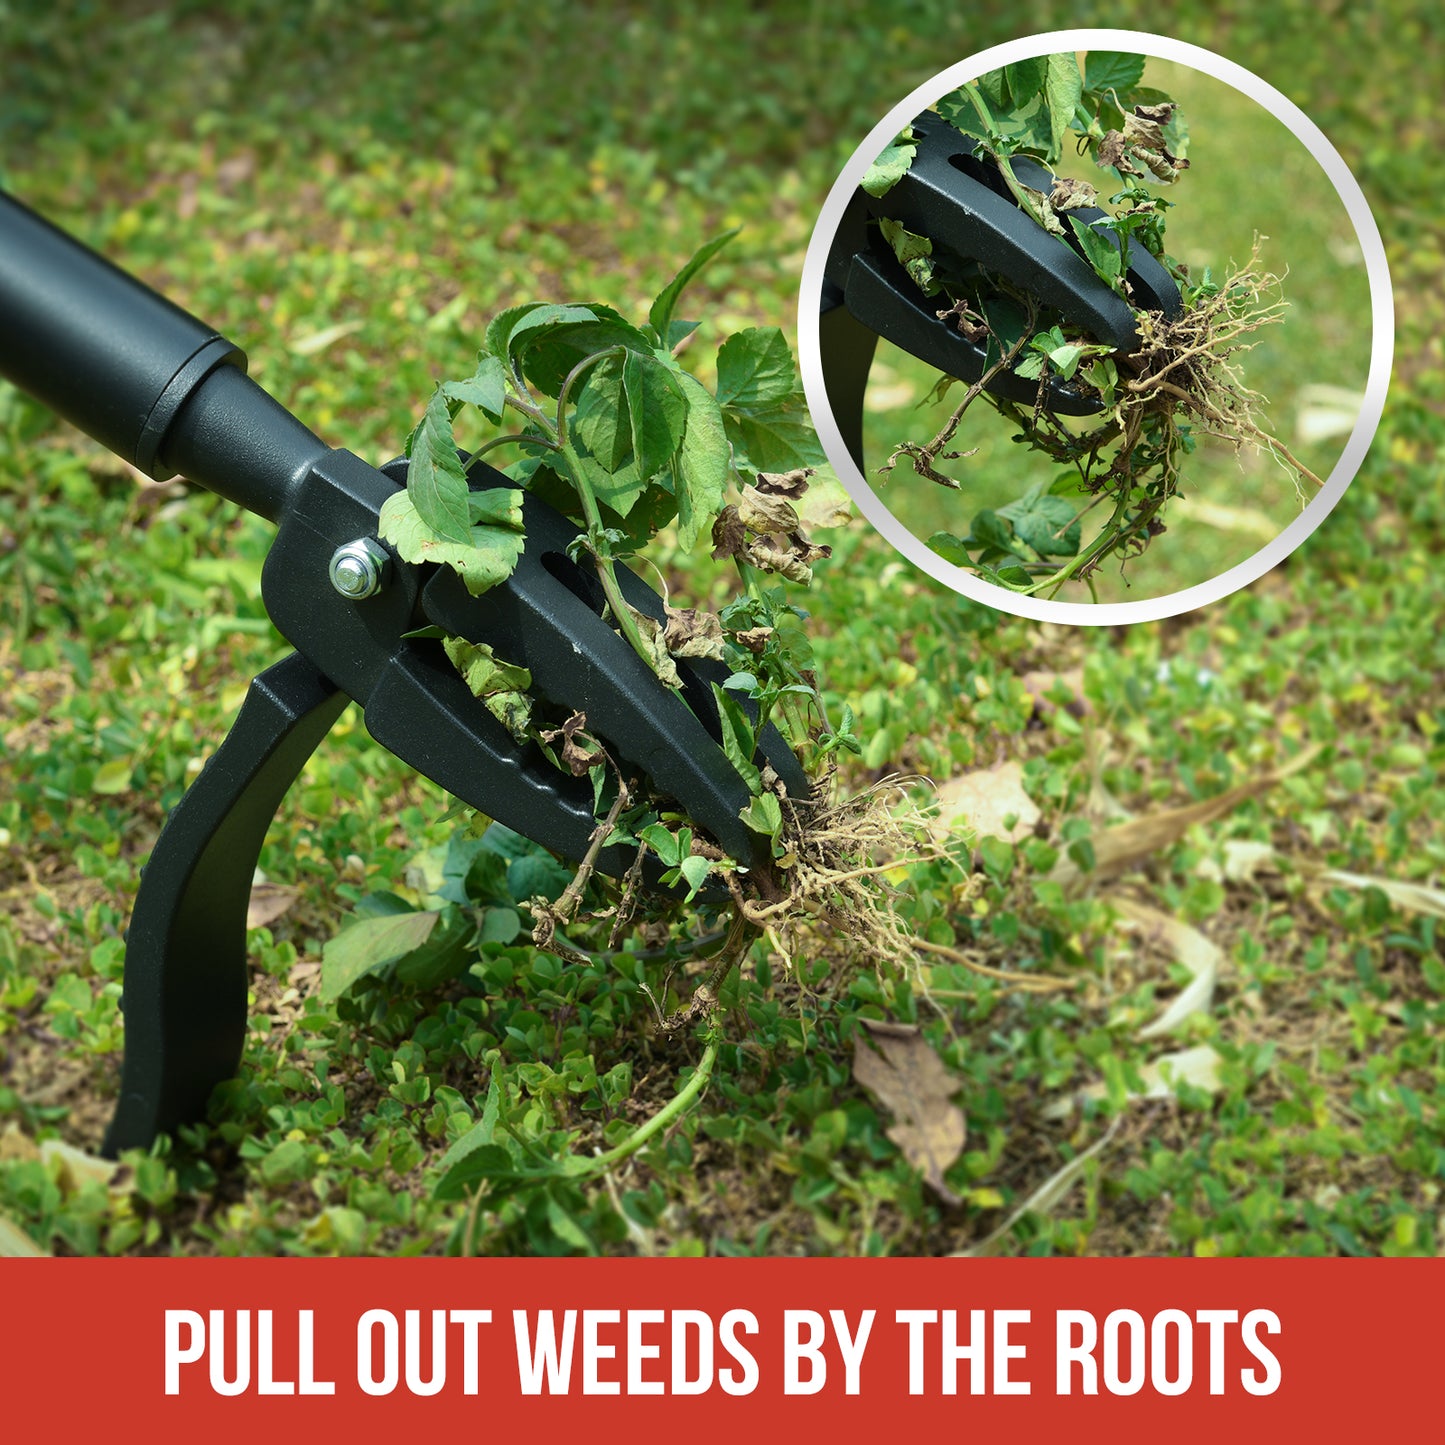 AMVOG 46-Inch Stand-Up Weed Puller, Made of Aluminum Alloy & 4-Claw Steel Head Design, Easily Remove Weeds Without Bending